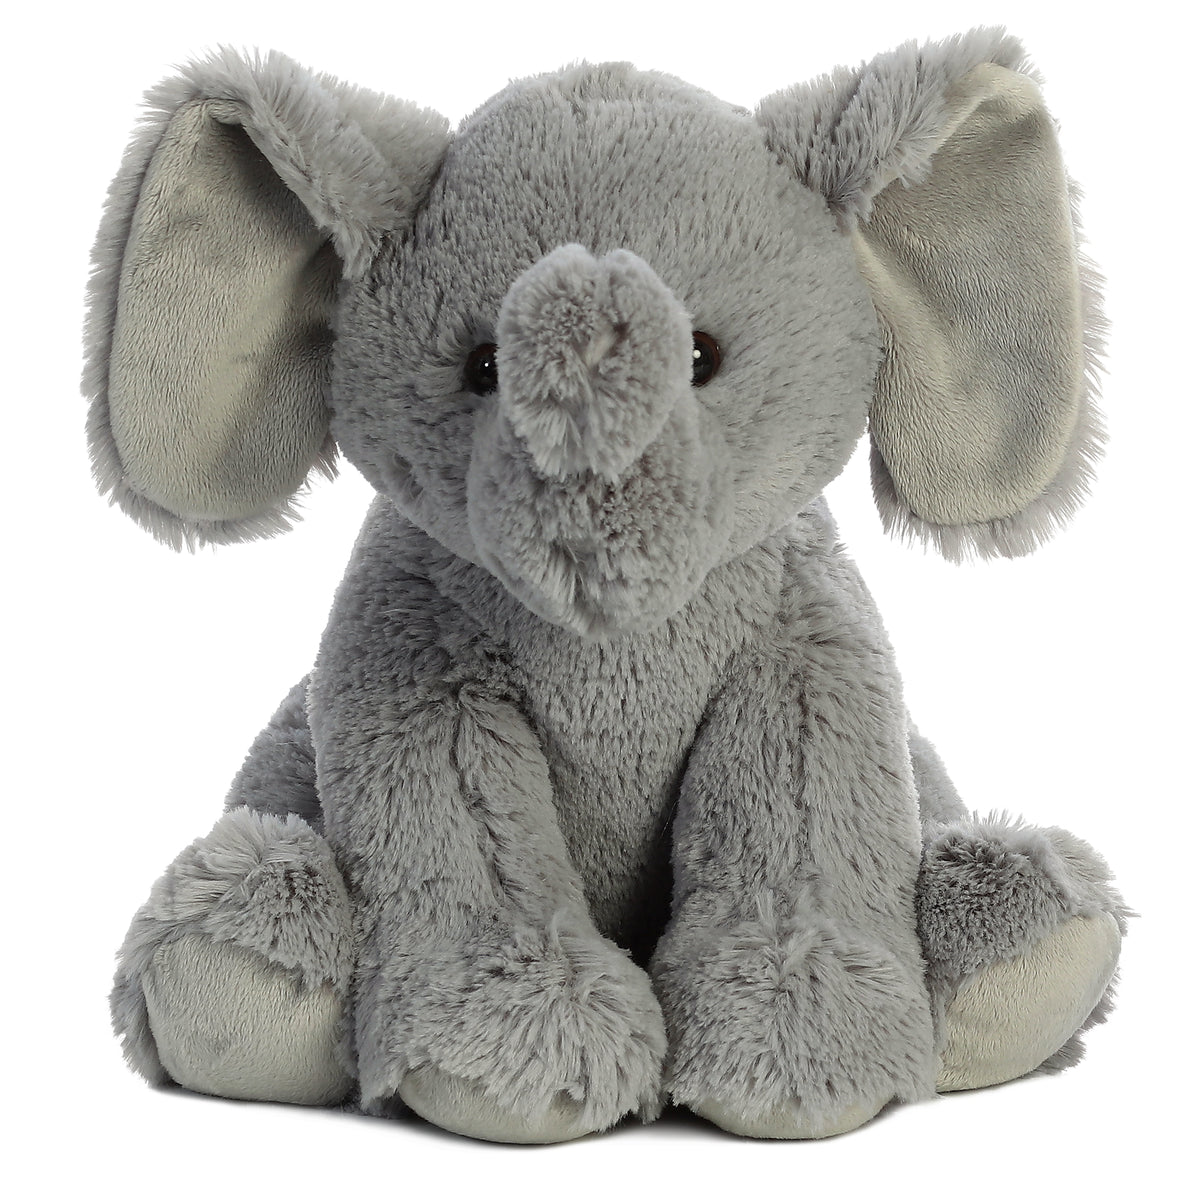 Aurora Elephant Plush with a lovable expression and cuddly body, ideal for comfort and collection.